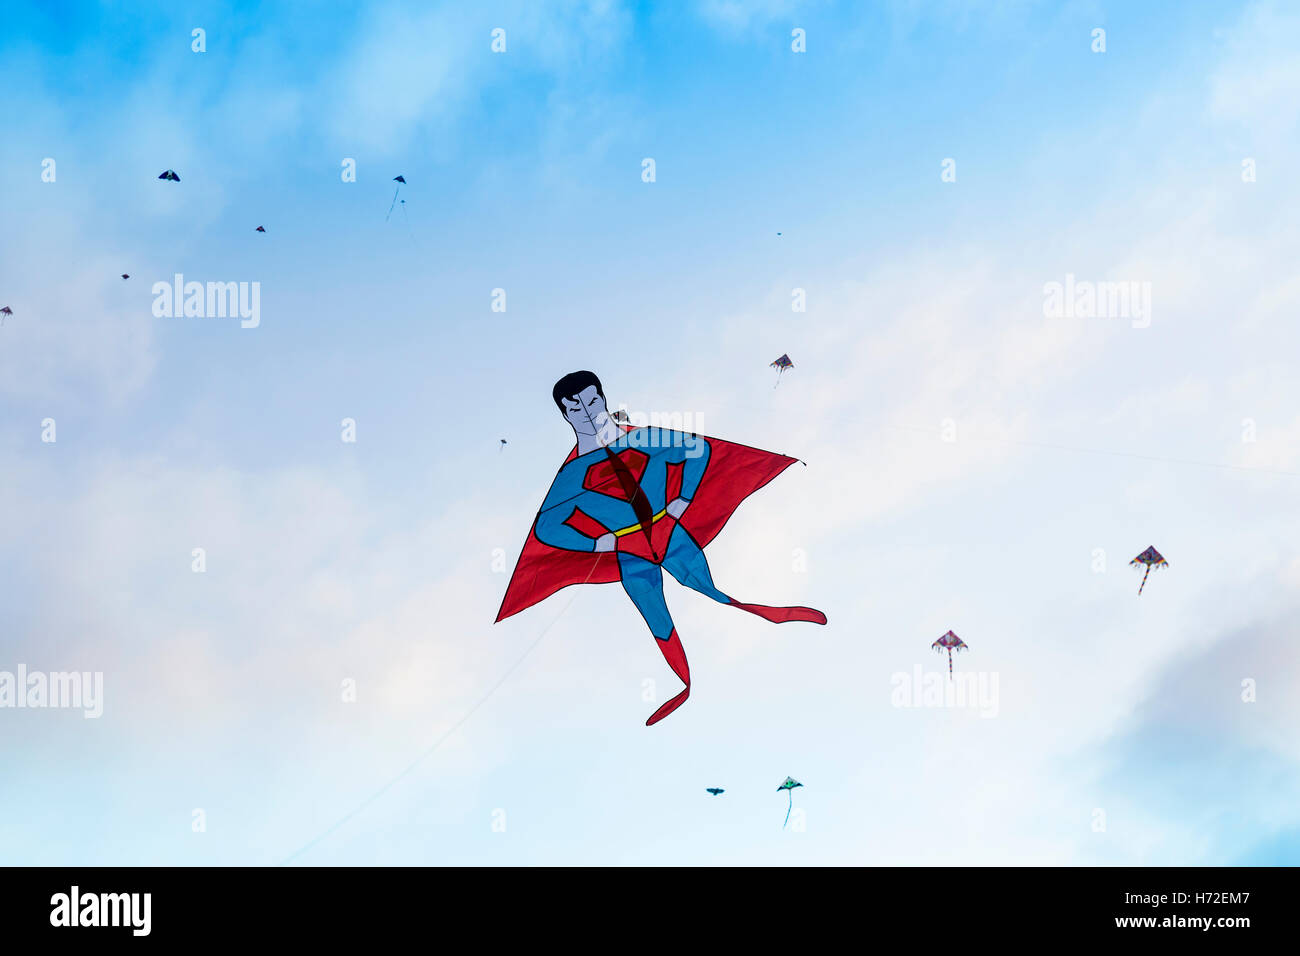 Guangzhou, China. October 2016. Superman Kite flying over a city park with other colorful kites Stock Photo